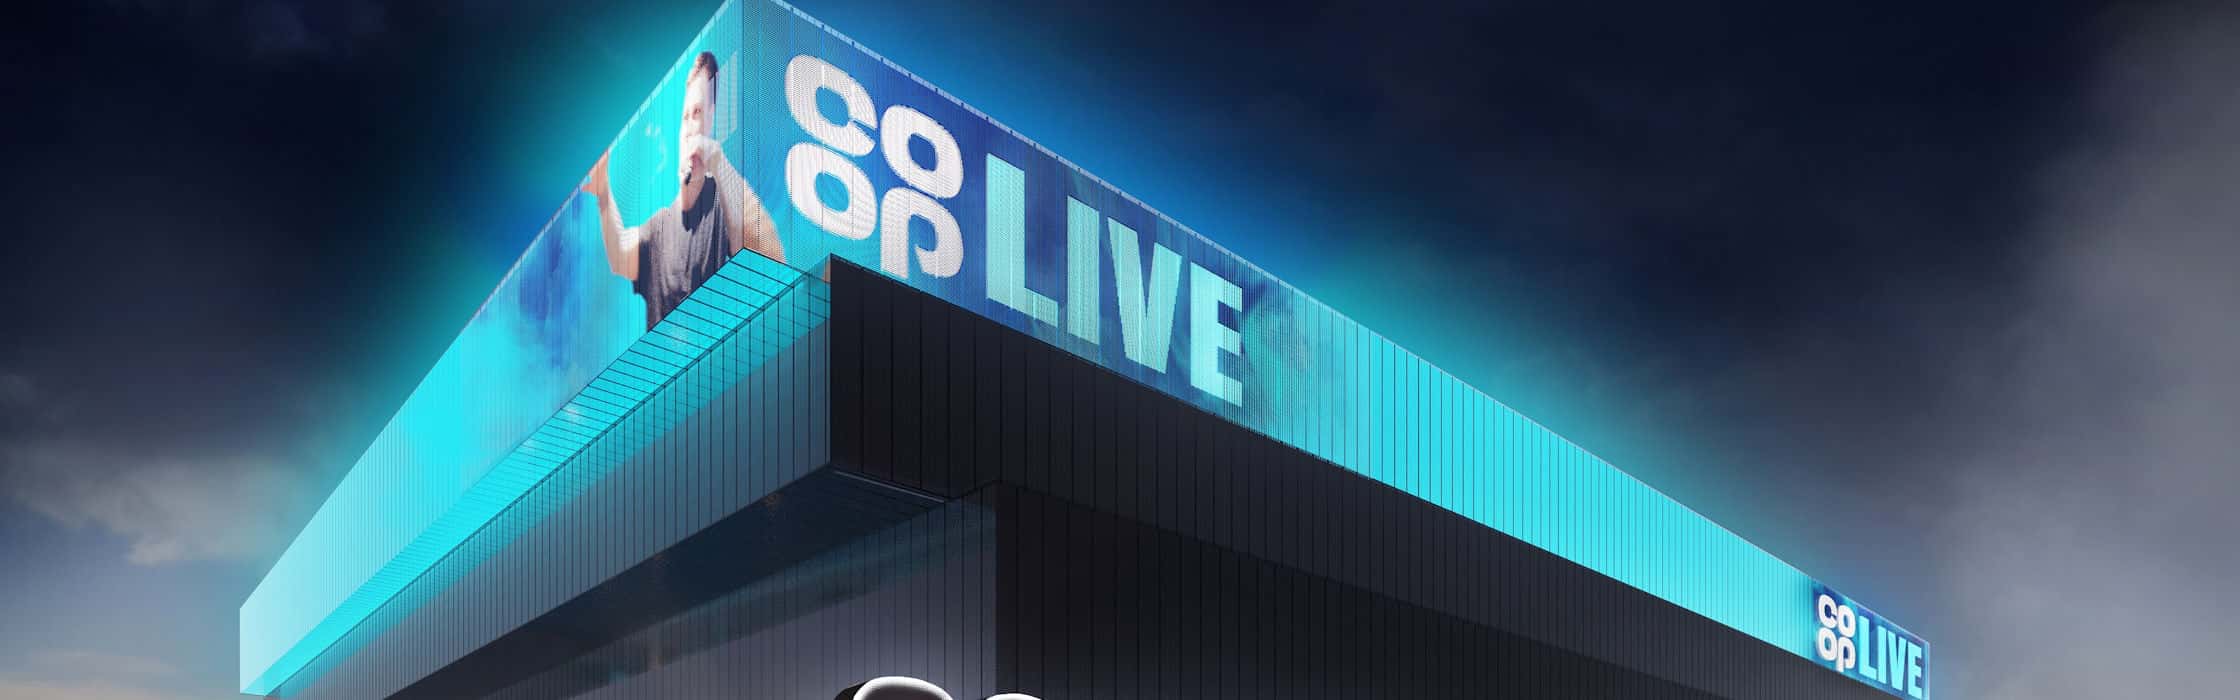 What's On at Co-op Live, Manchester